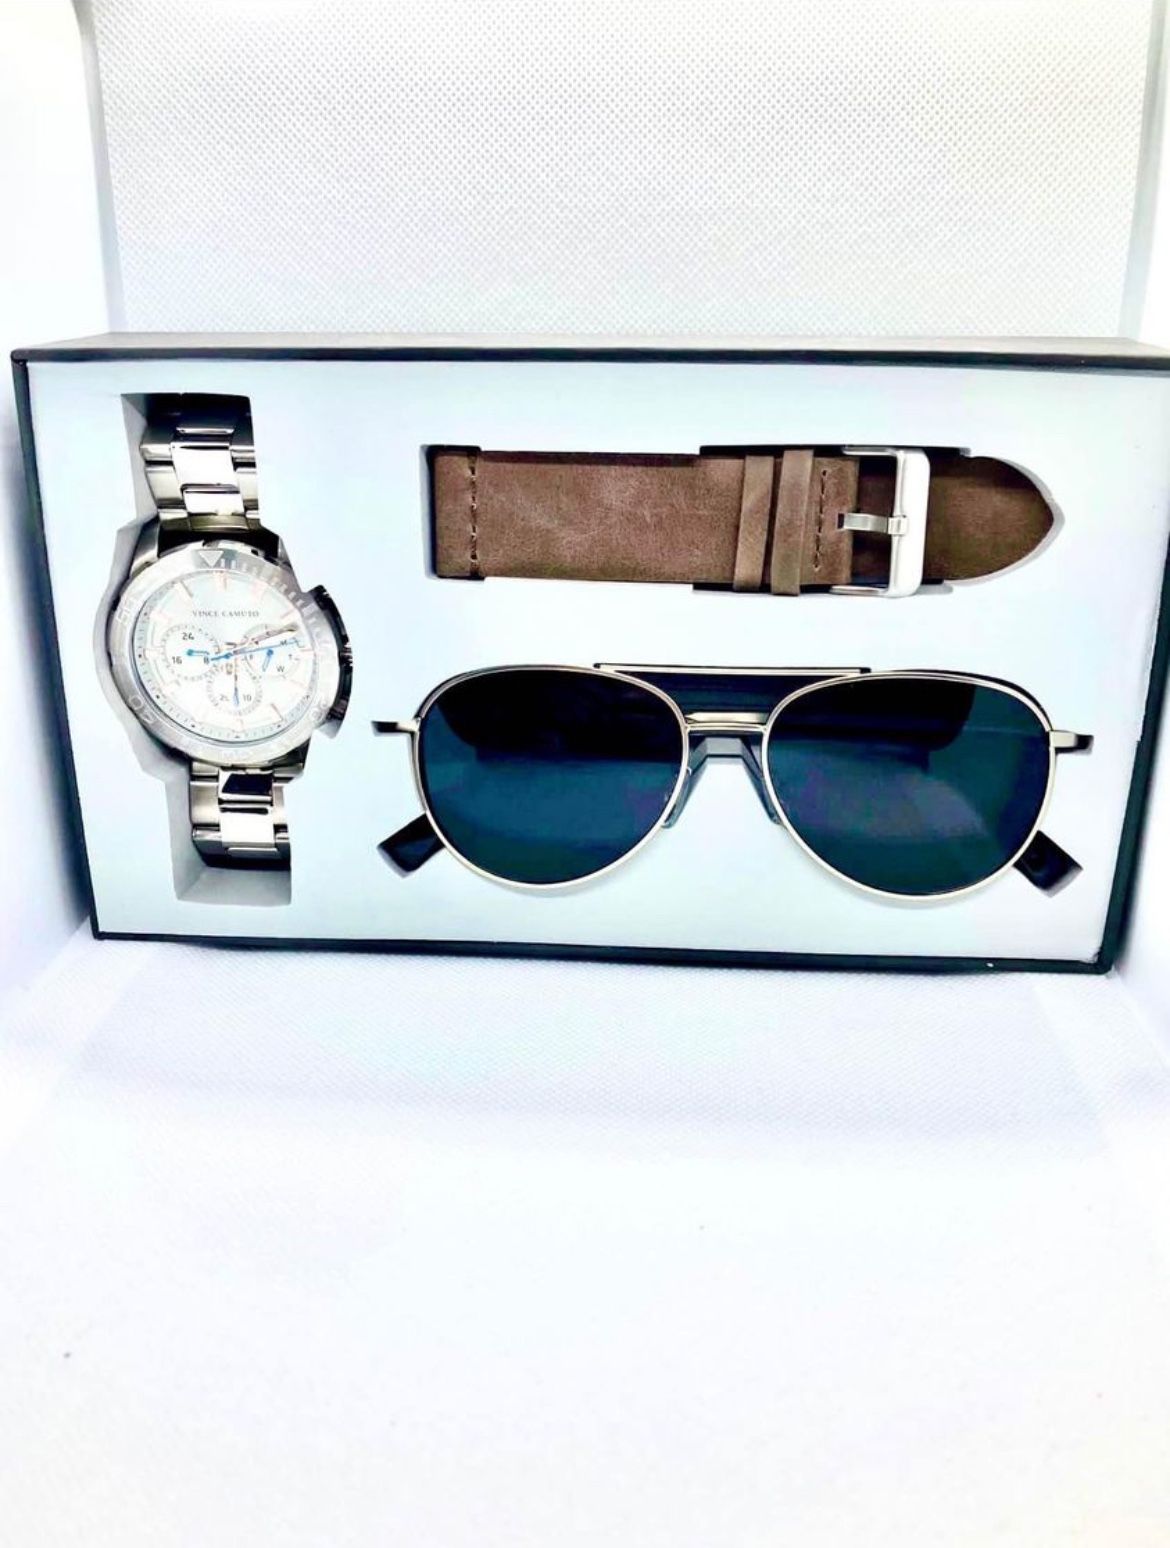 Vince Camuto Men’s Chronograph Watch GIFT SET with Sunglasses VC/1147GYSVST NEW